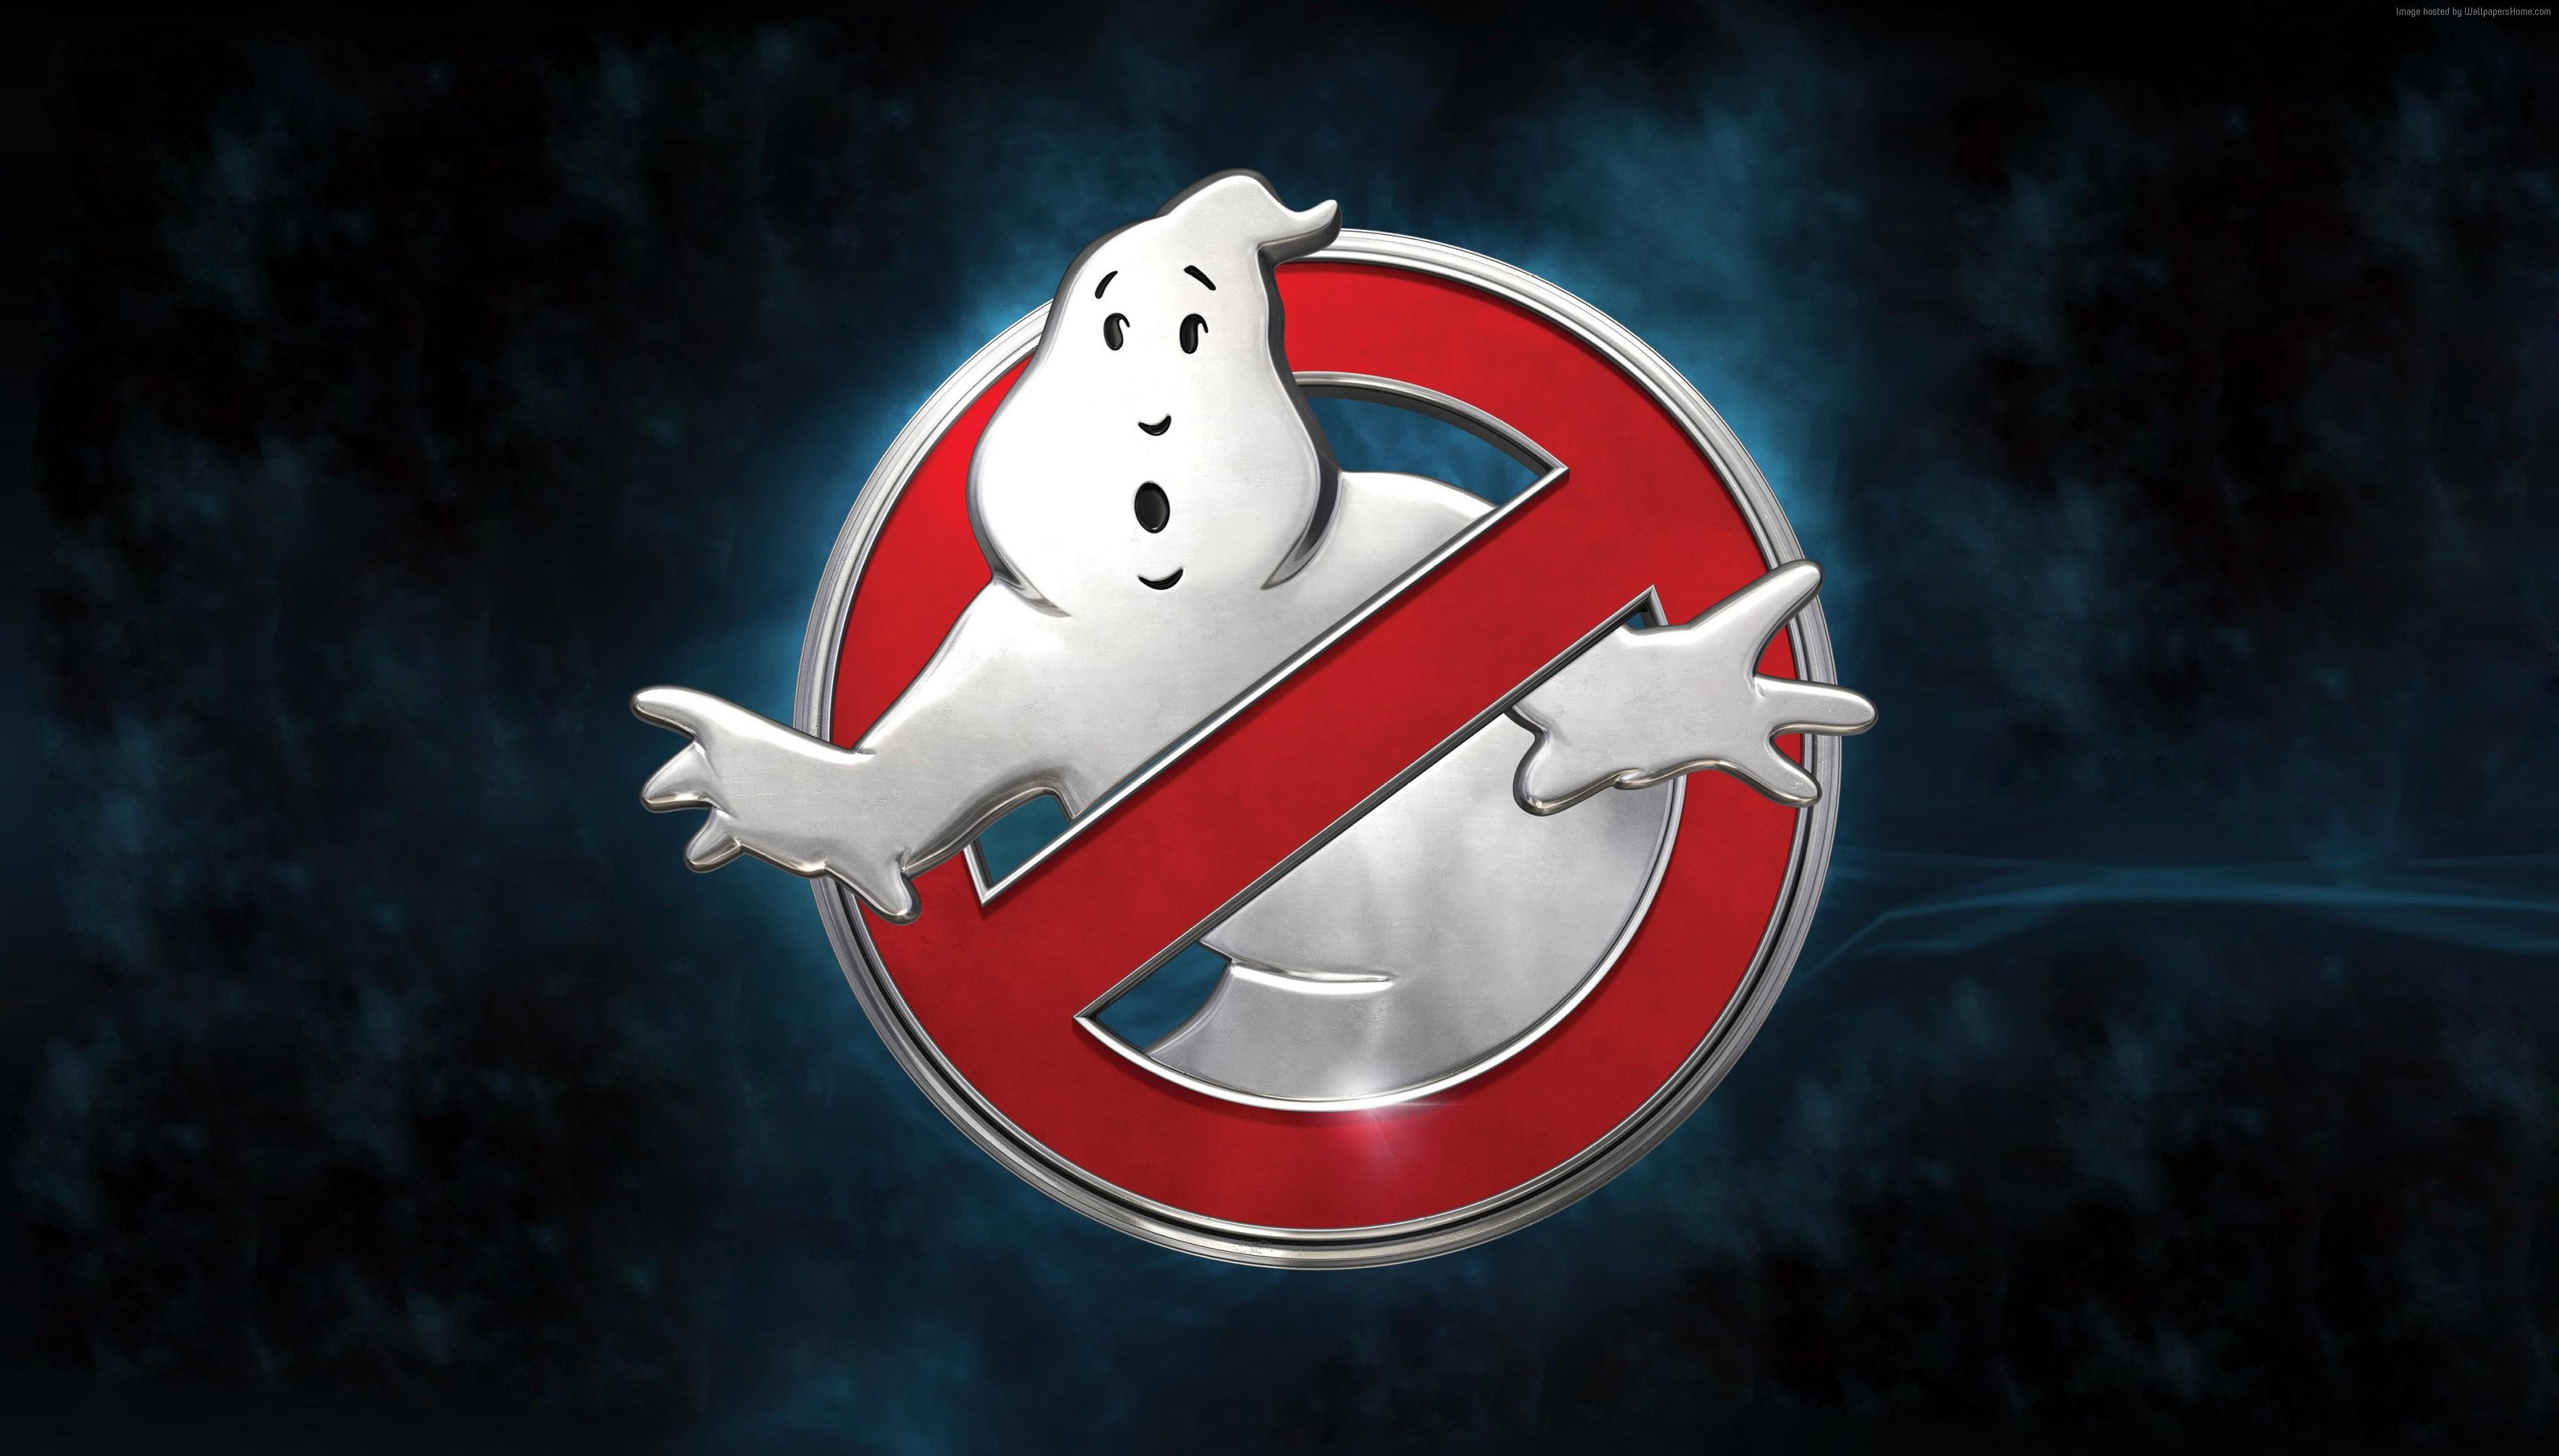 A Complete Guide to Ghostbusters Easter Eggs and References